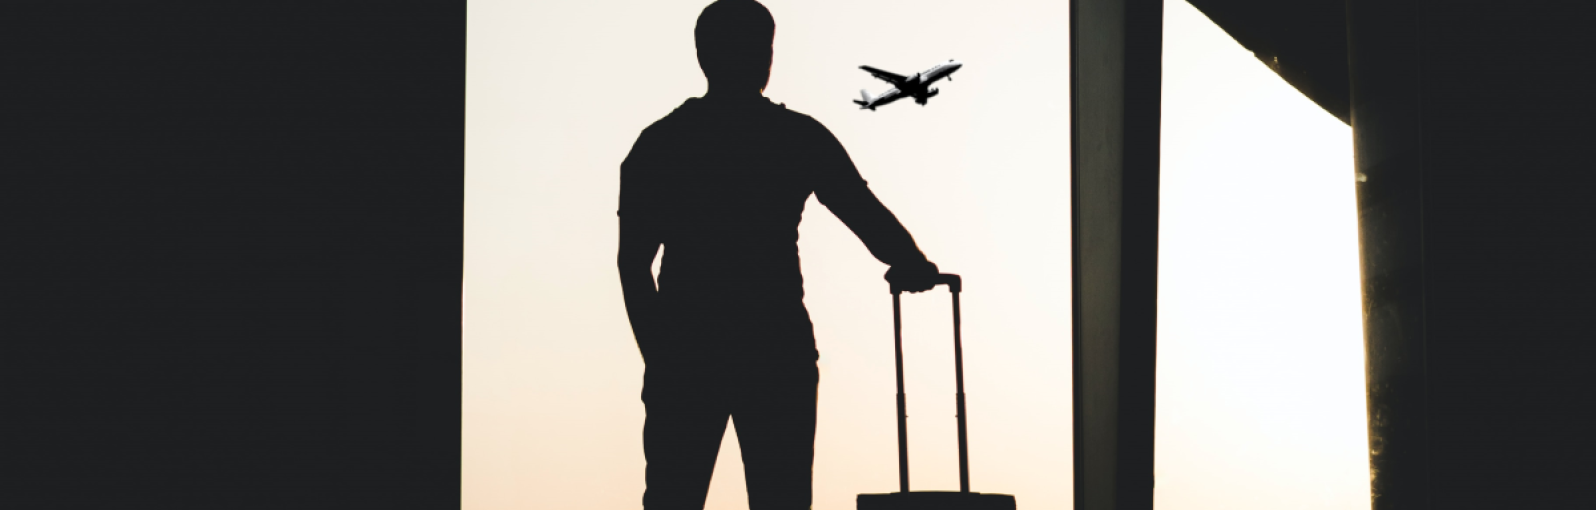 A person stands with luggage and watches a plane take off